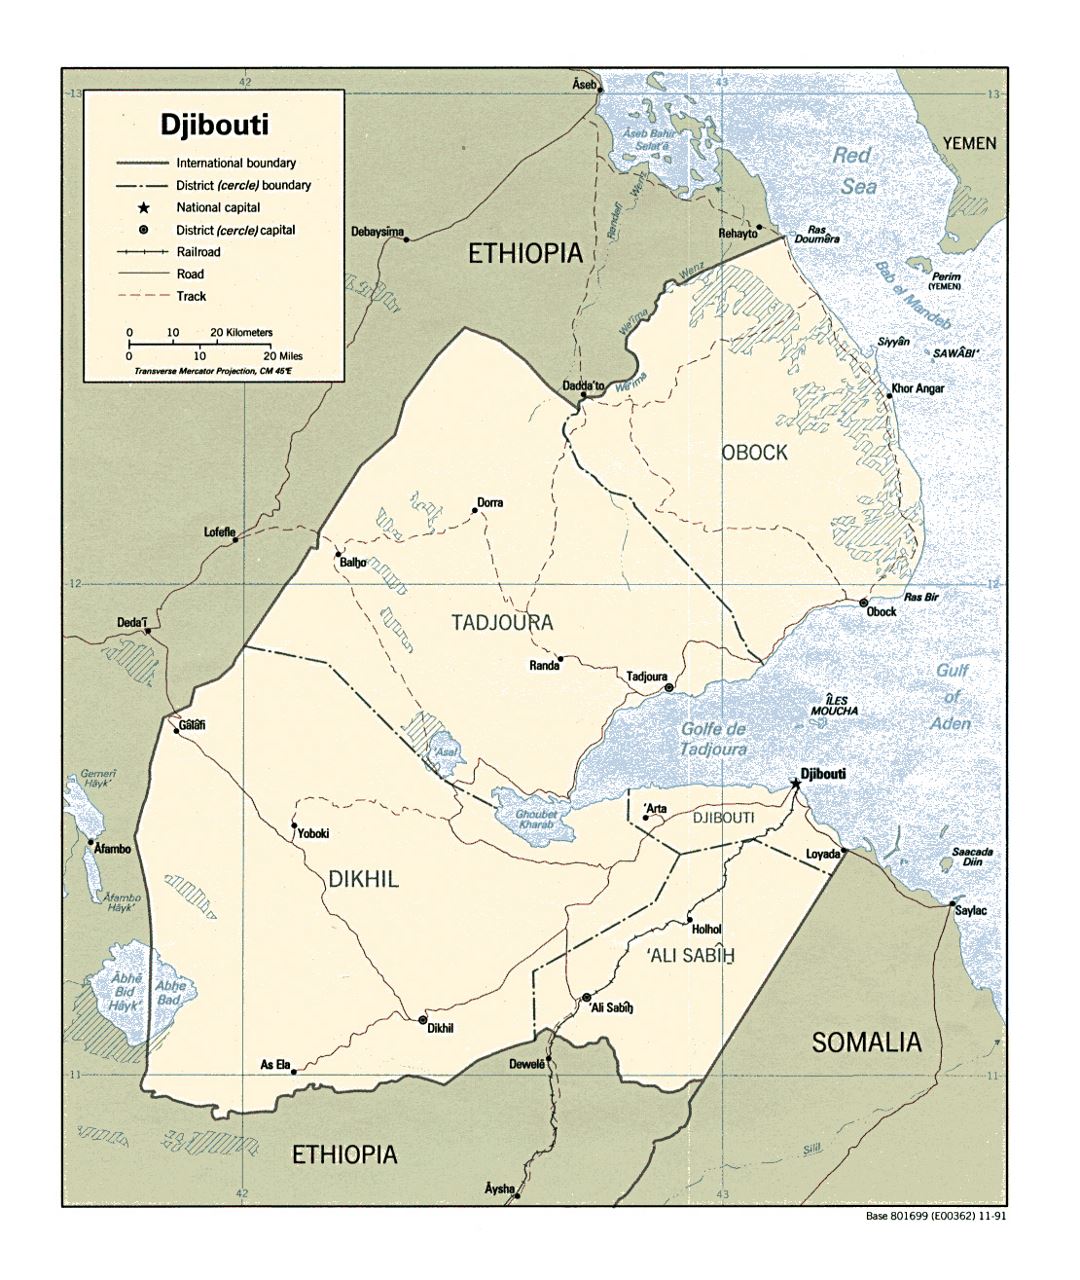 Detailed political and administrative map of Djibouti with roads, railroads and major cities - 1991